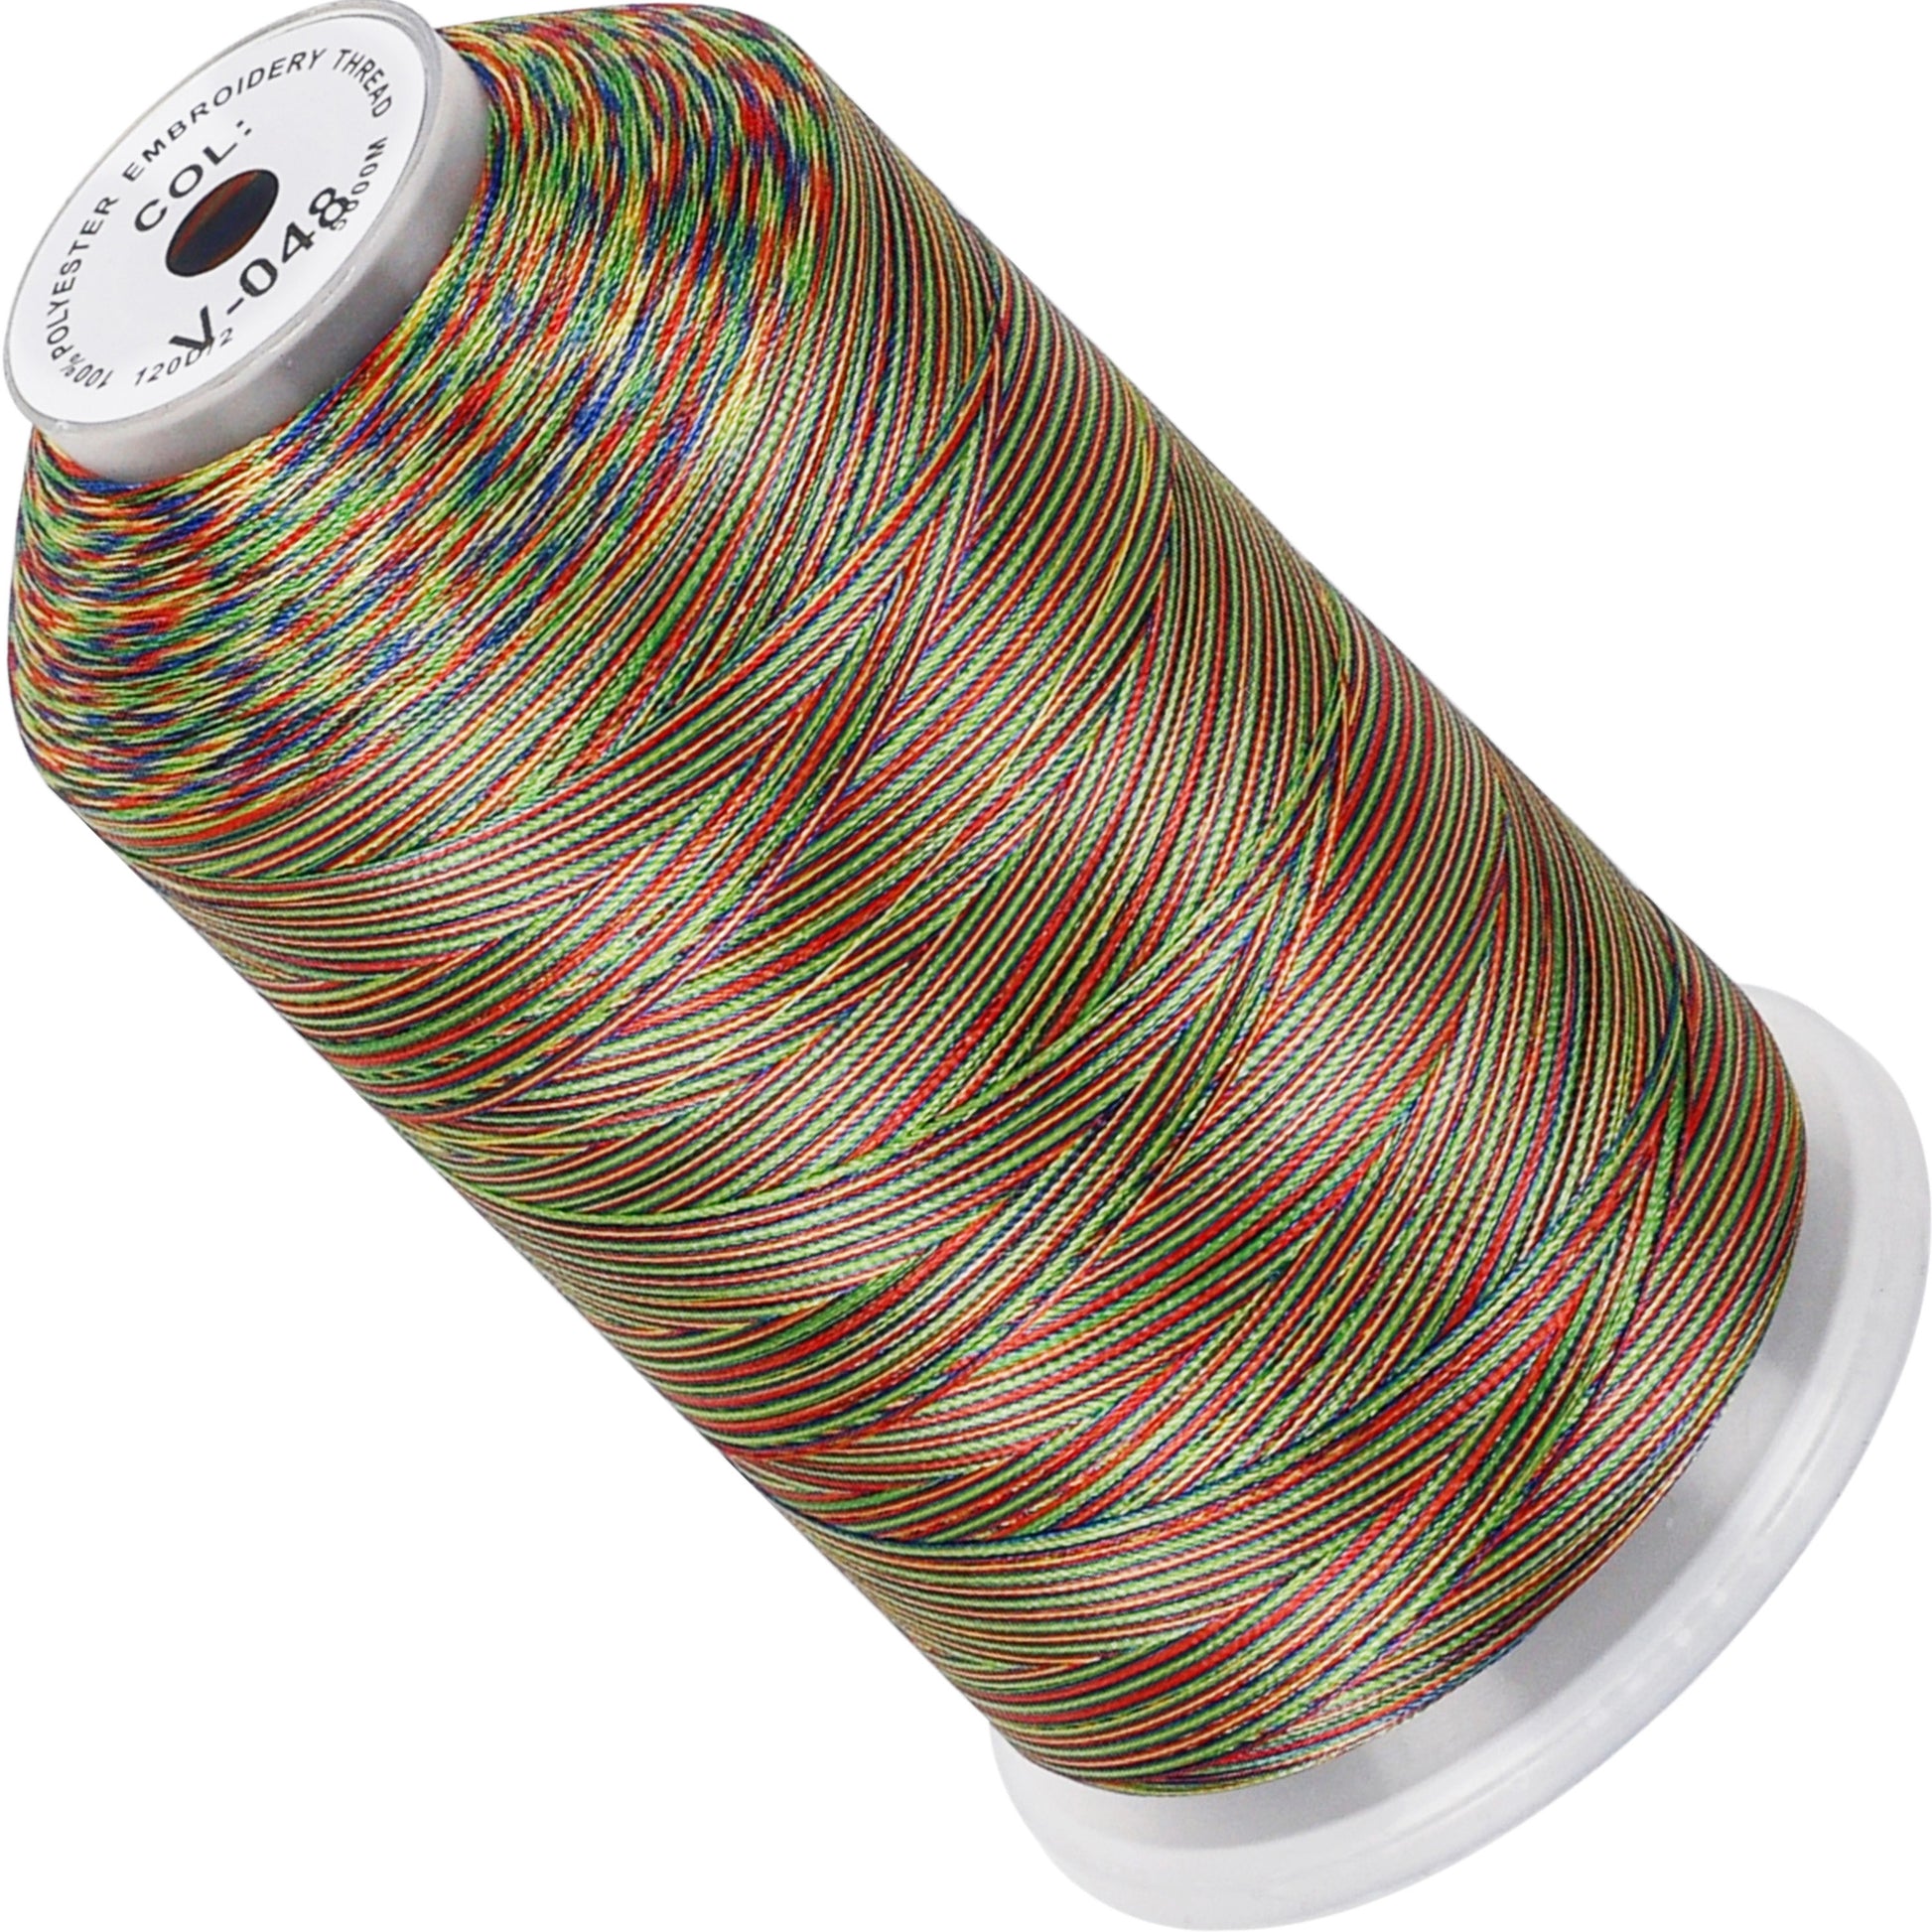 New Brothread Polyester Embroidery Machine Thread 1000M Each with